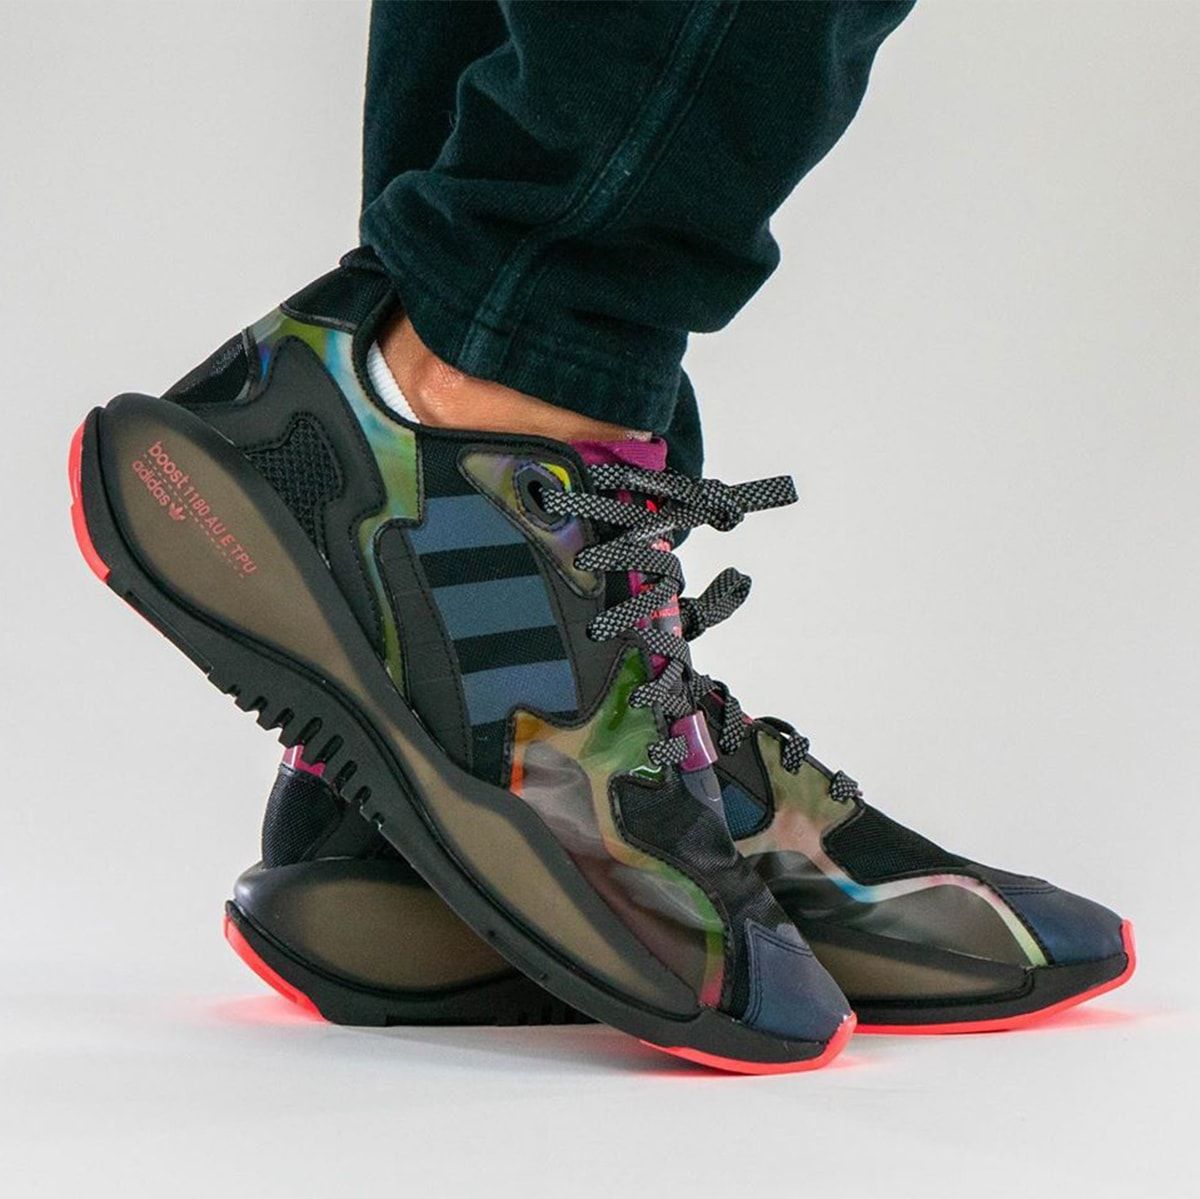 The atmos x adidas ZX Alkyne “Neo Tokyo” Arrives September 18th 